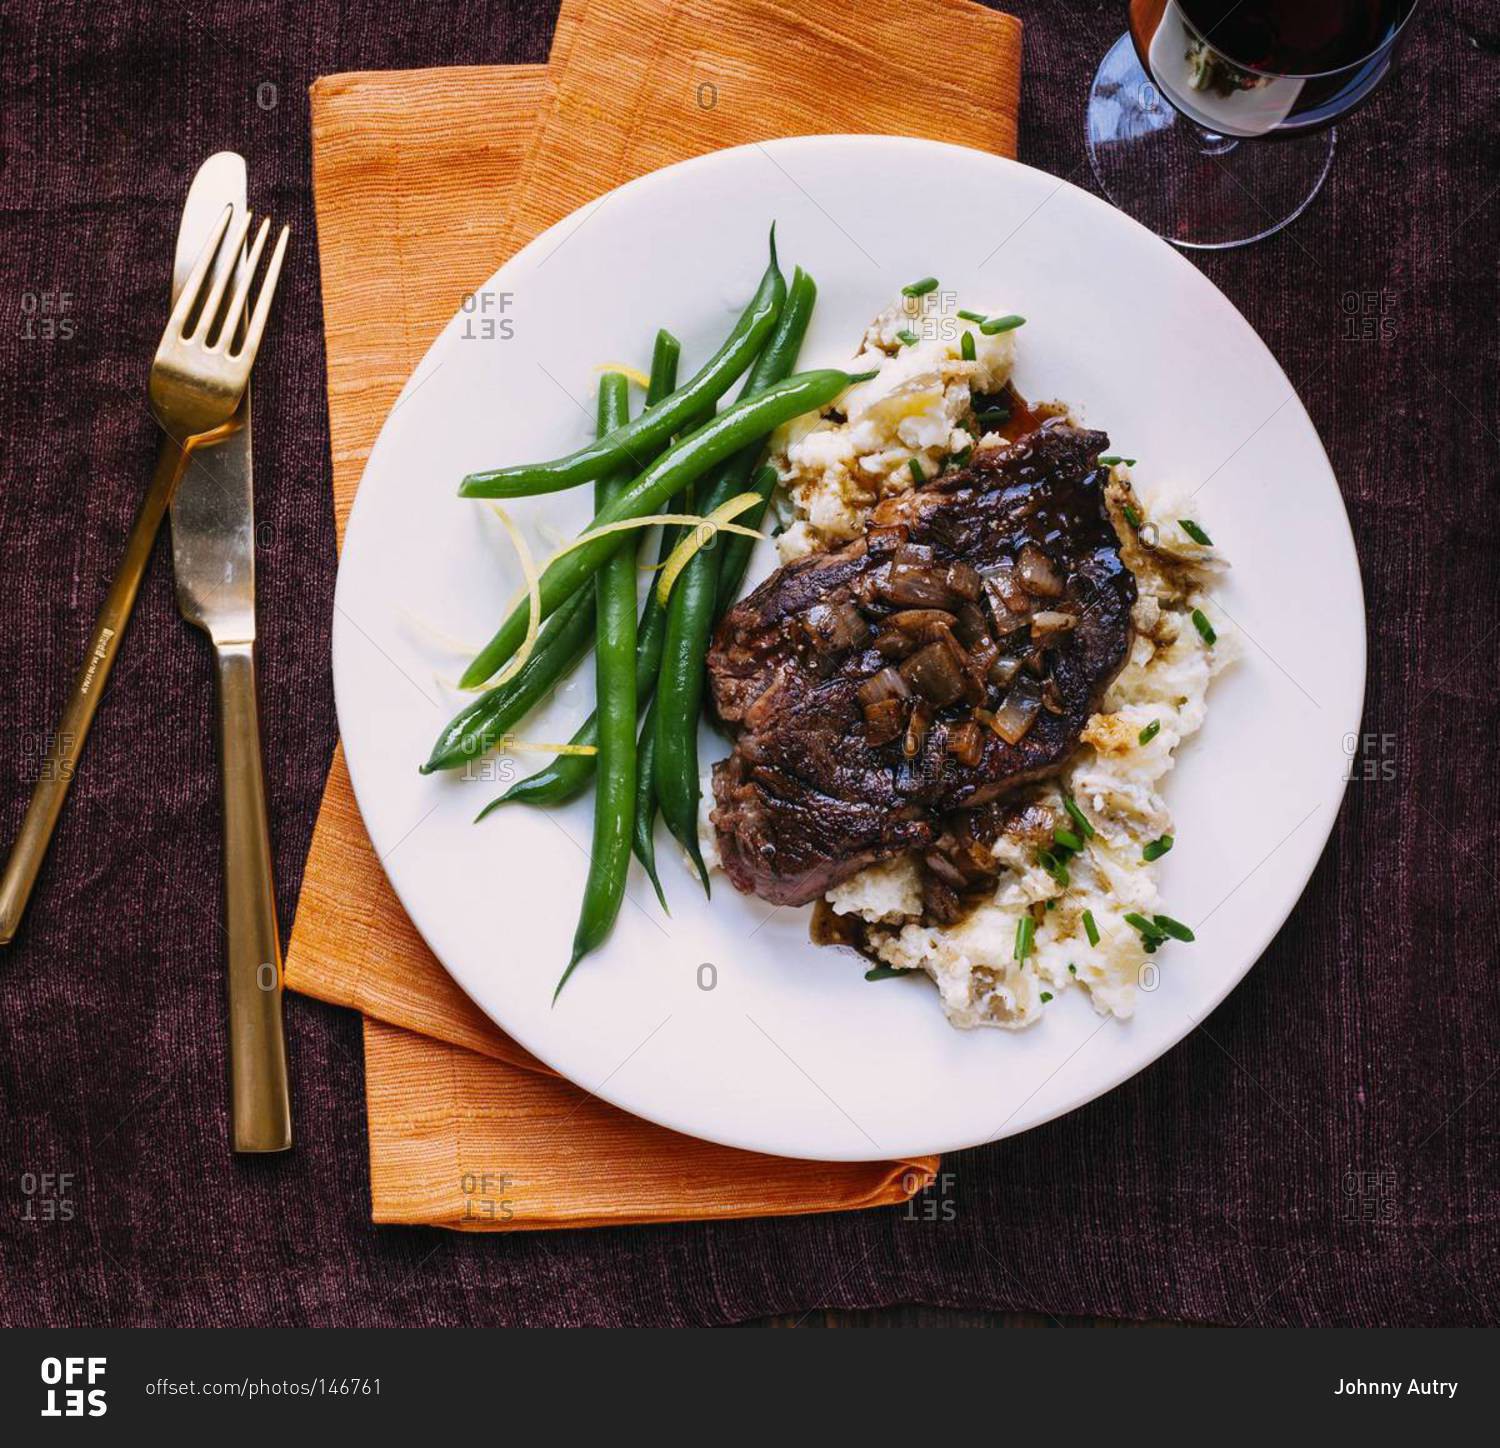 Seared steak with caramelized onion